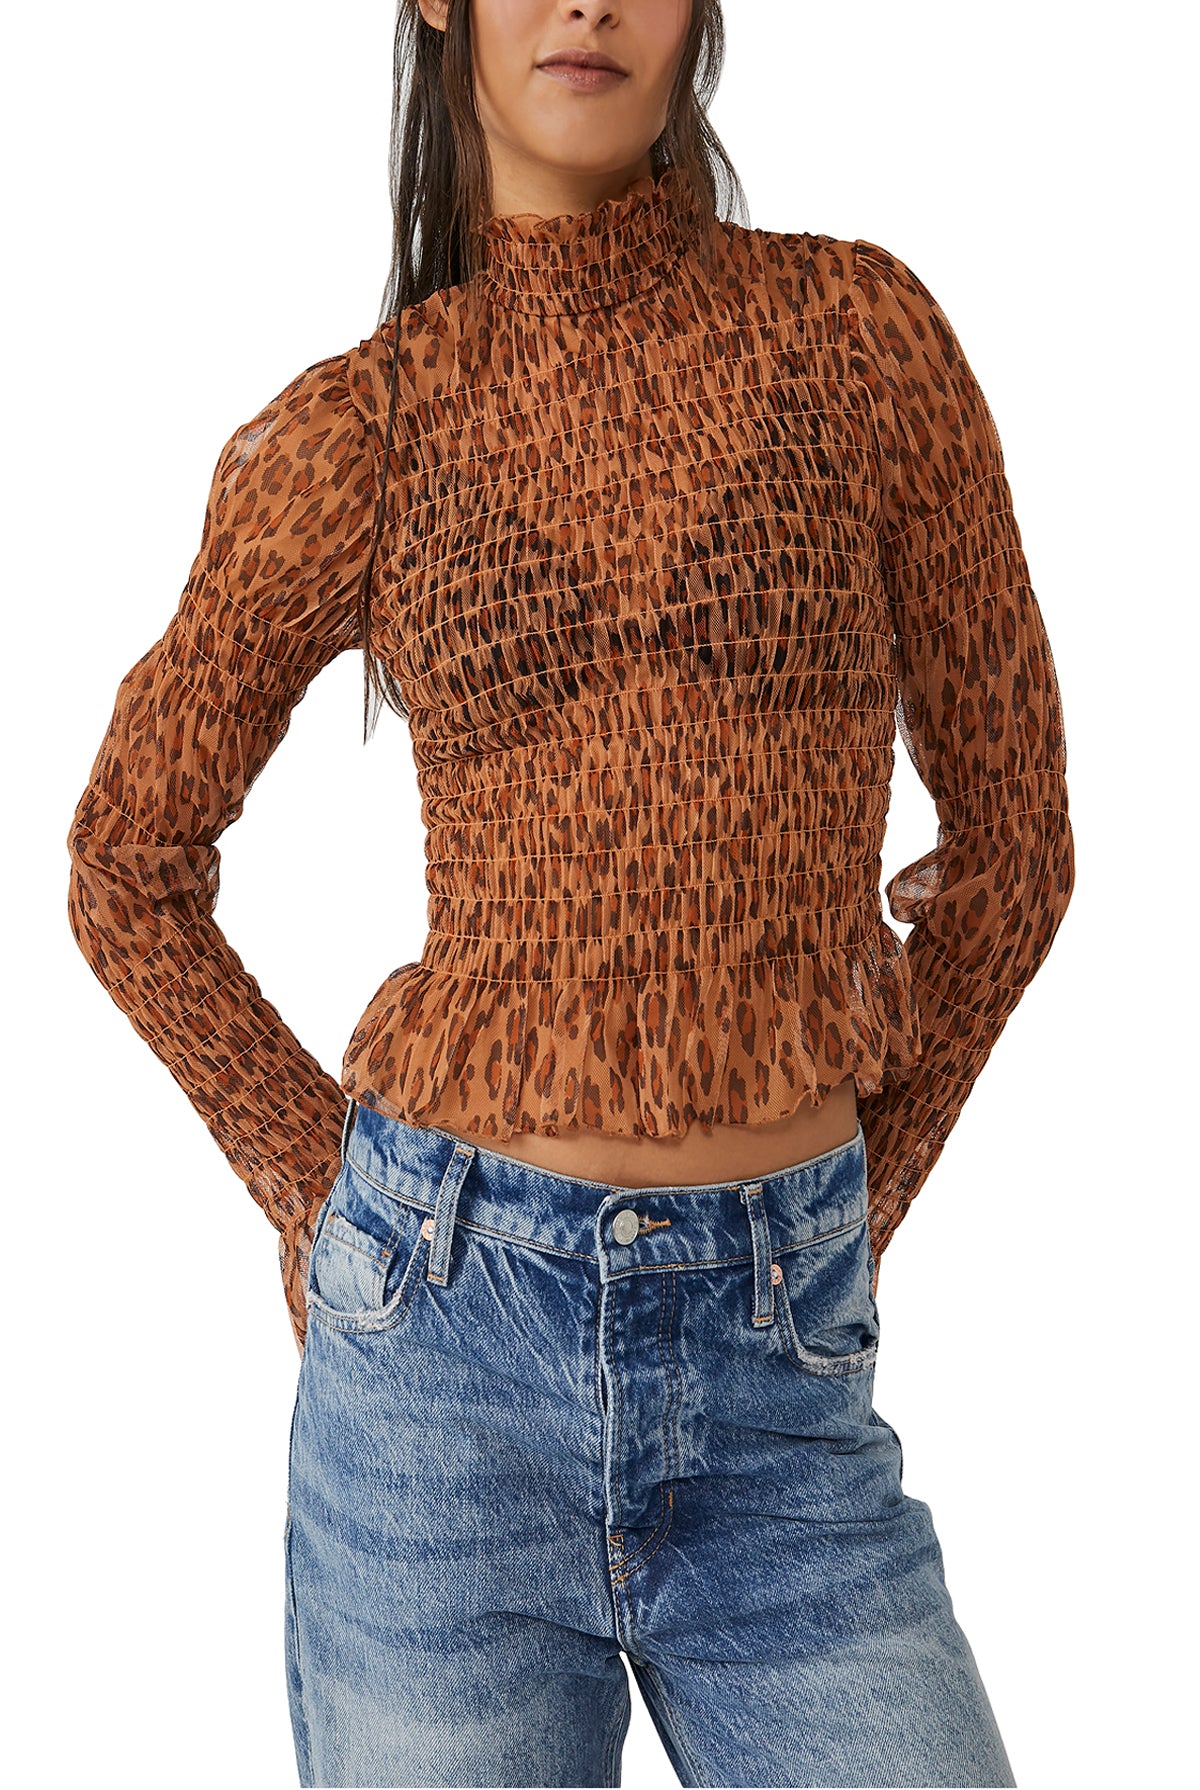 Free People Hello There Top - XS LEOPARD COMBO